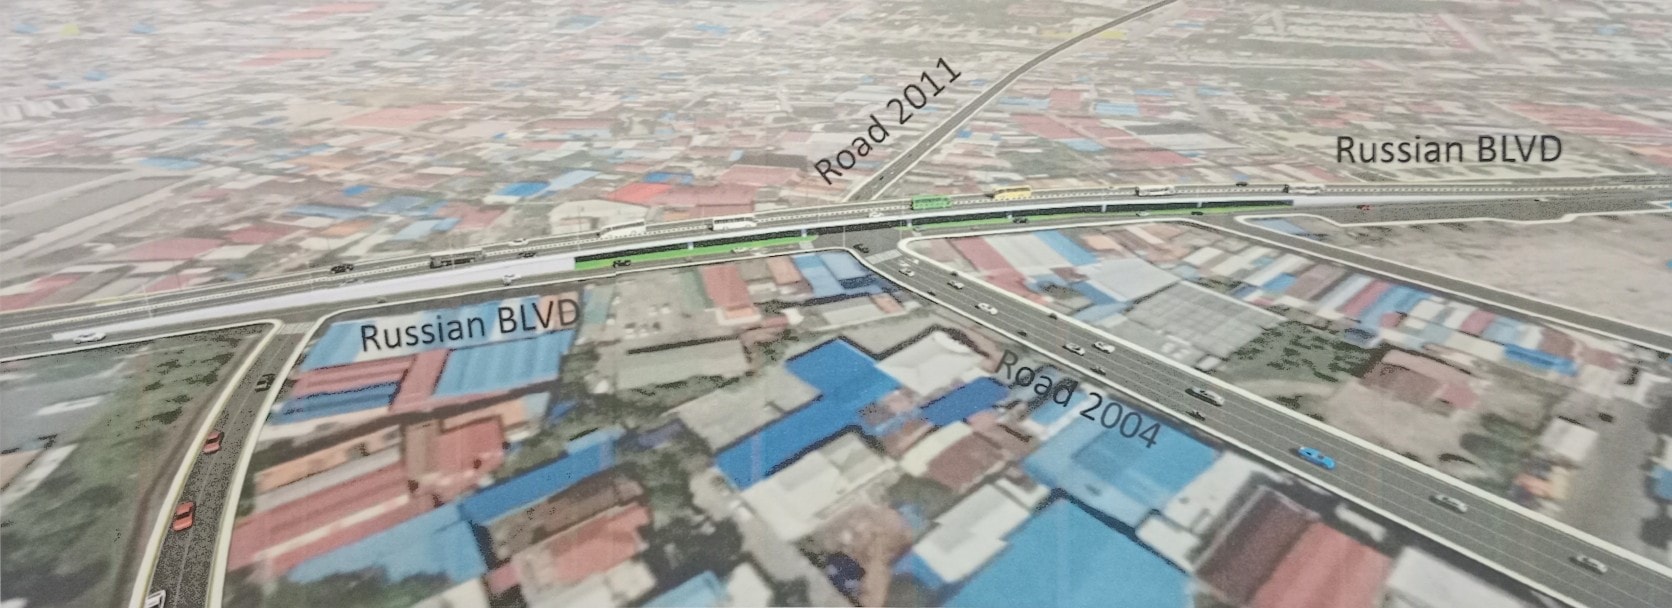 Another Overpass To Be Built in Phnom Penh